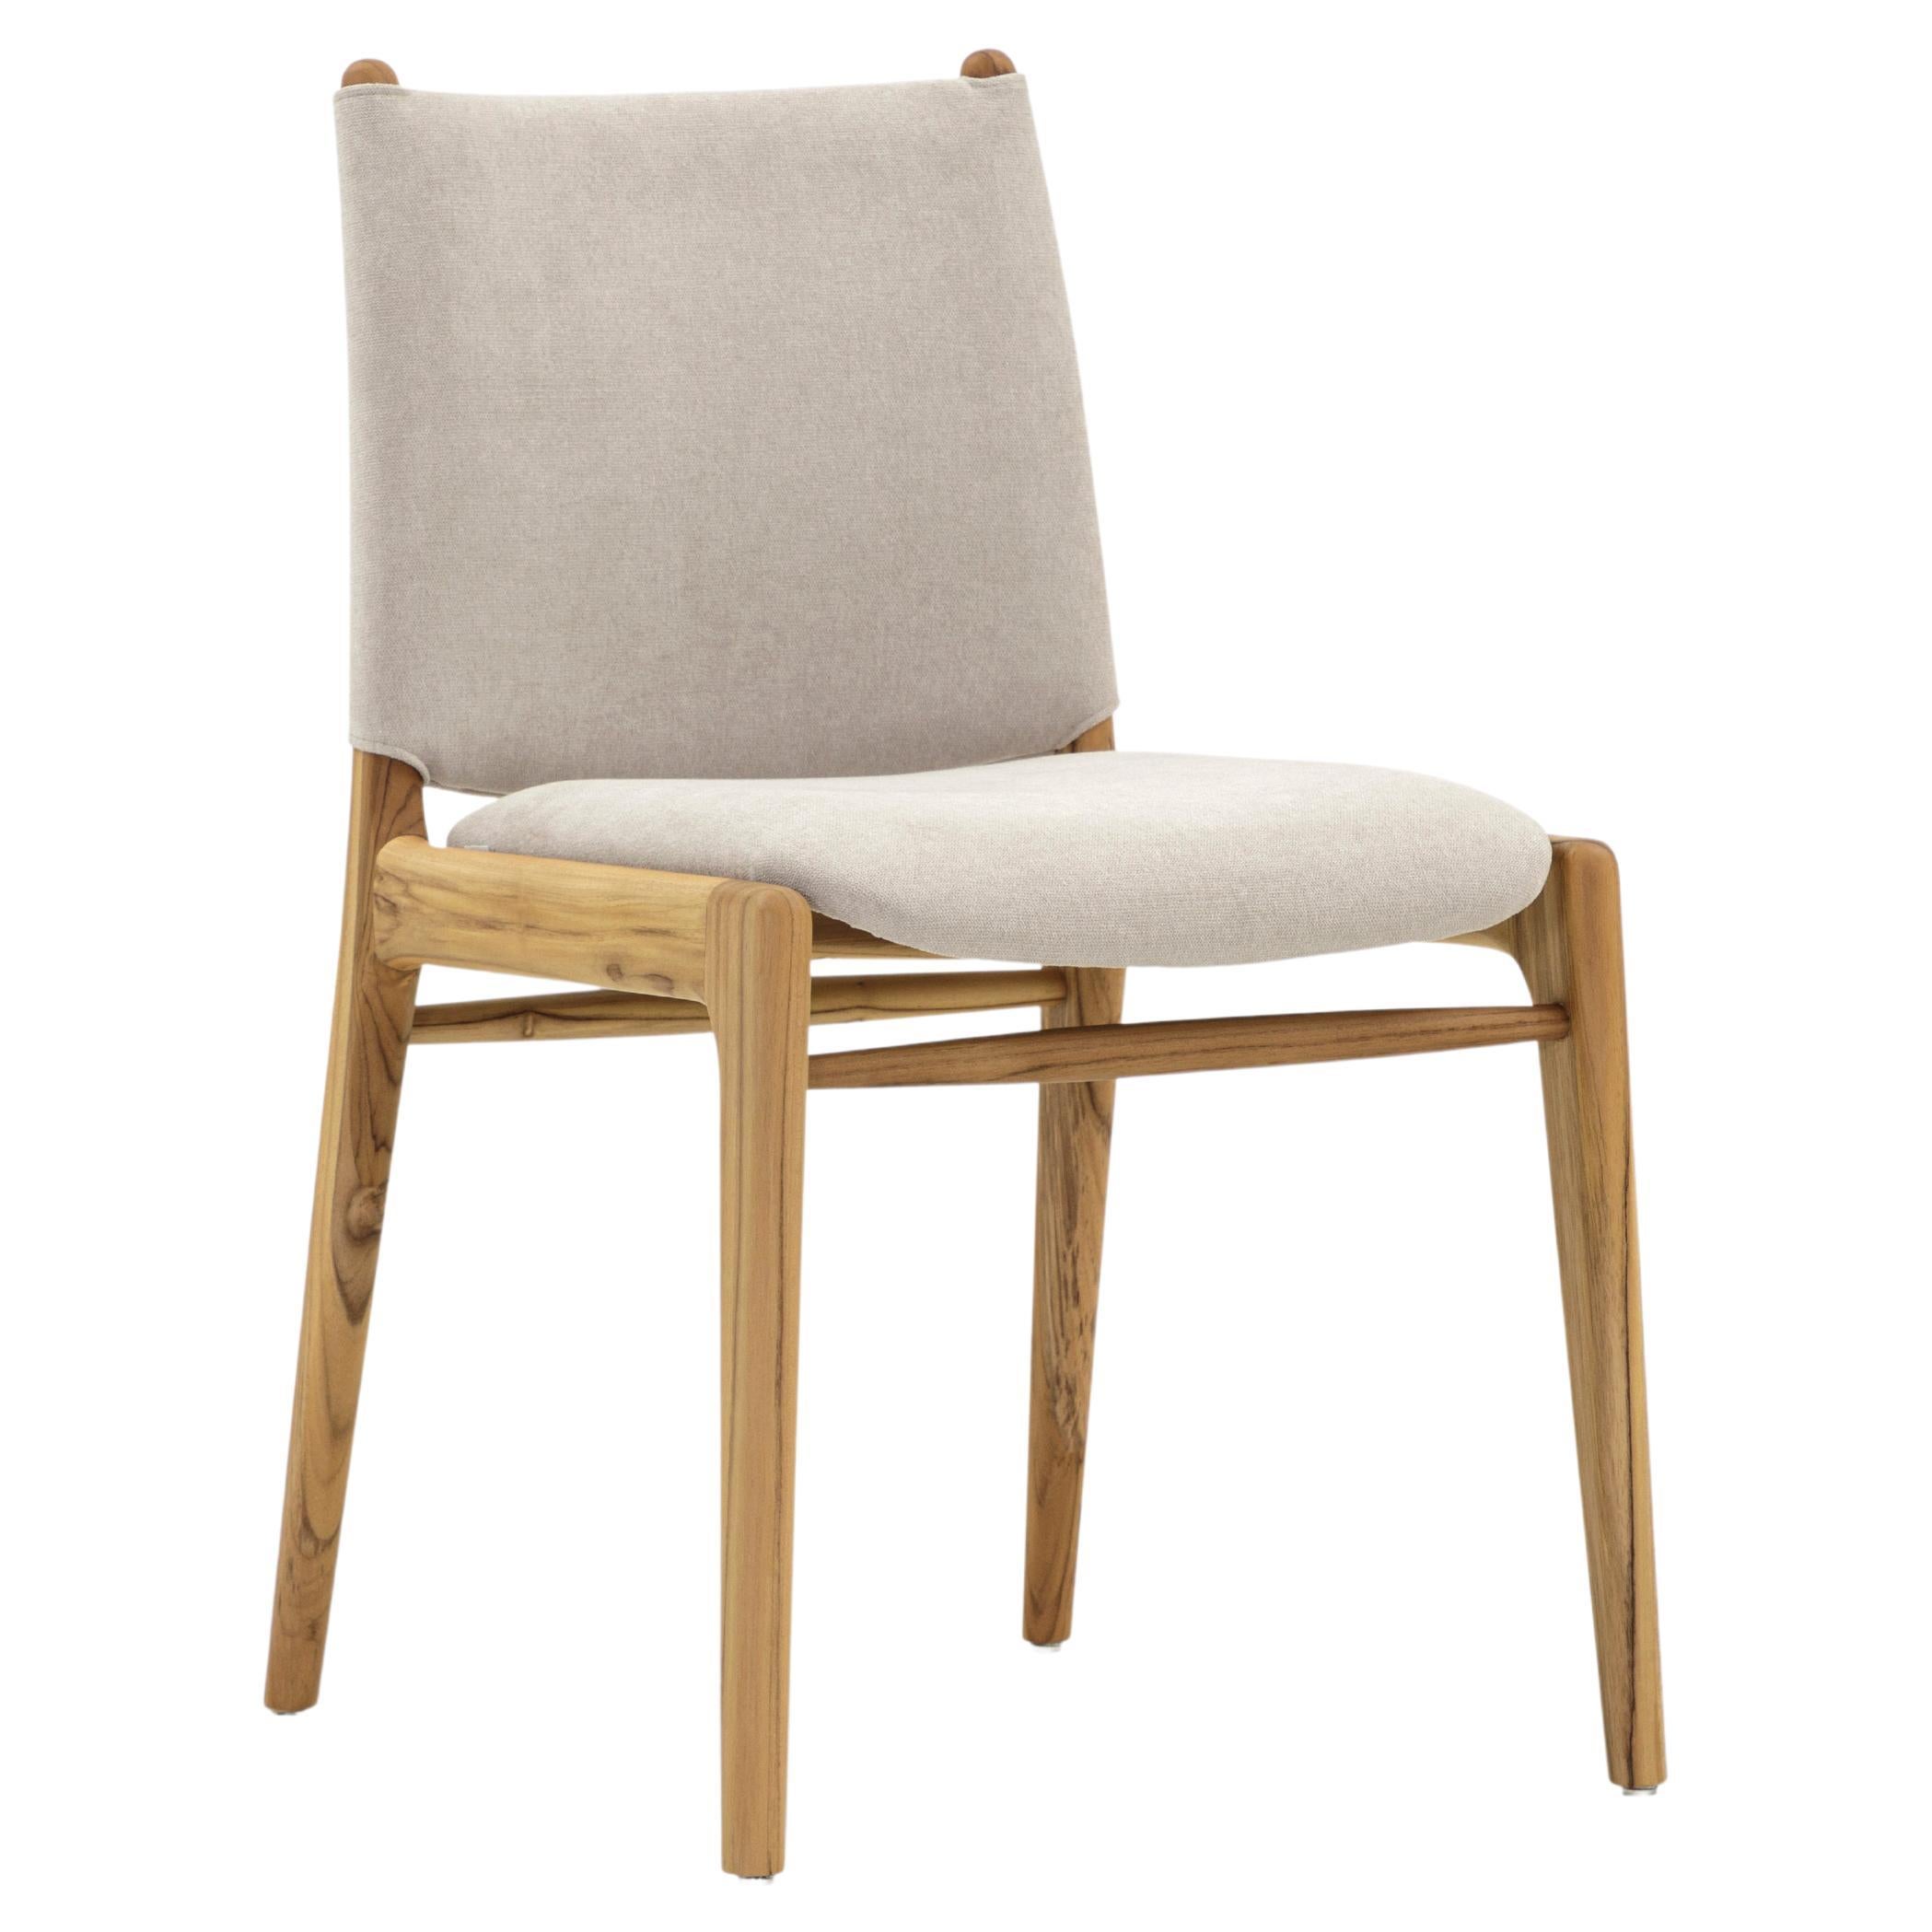 Brazilian Cappio Dining Chair in Teak Wood Finish with Ivory Fabric, Set of 2 For Sale